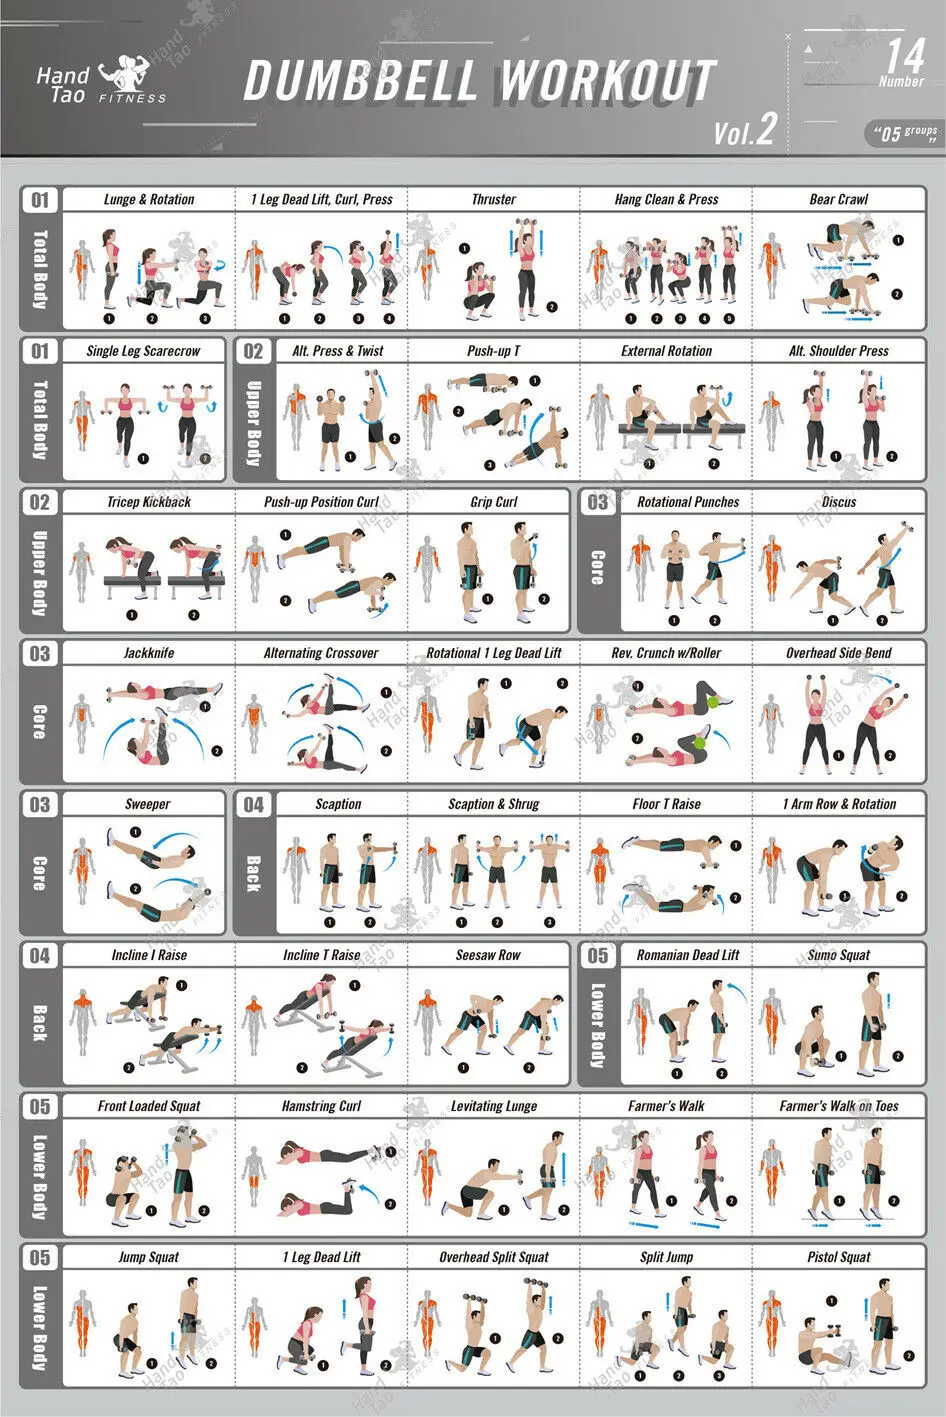 Dumbbell Workout Exercise Poster BodyBuilding Guide Fitness Gym Chart paintings canvas Prints Wall Art For Home Decor